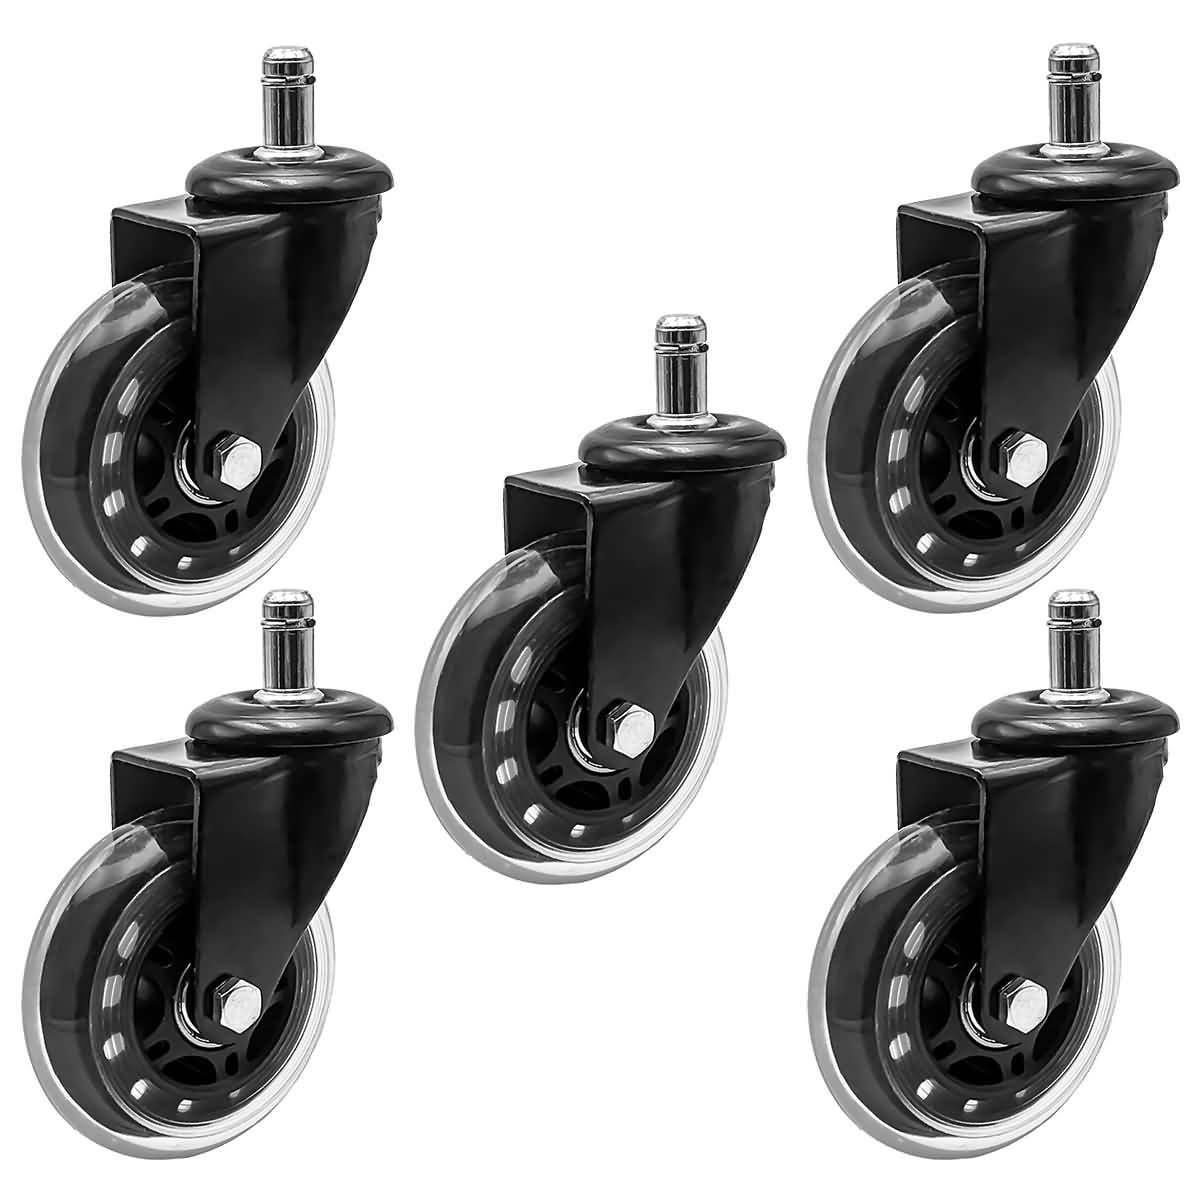 5 Pack Office Chair Caster Heavy Duty Rubber Swivel Wheel Replacement Set 3 inch 